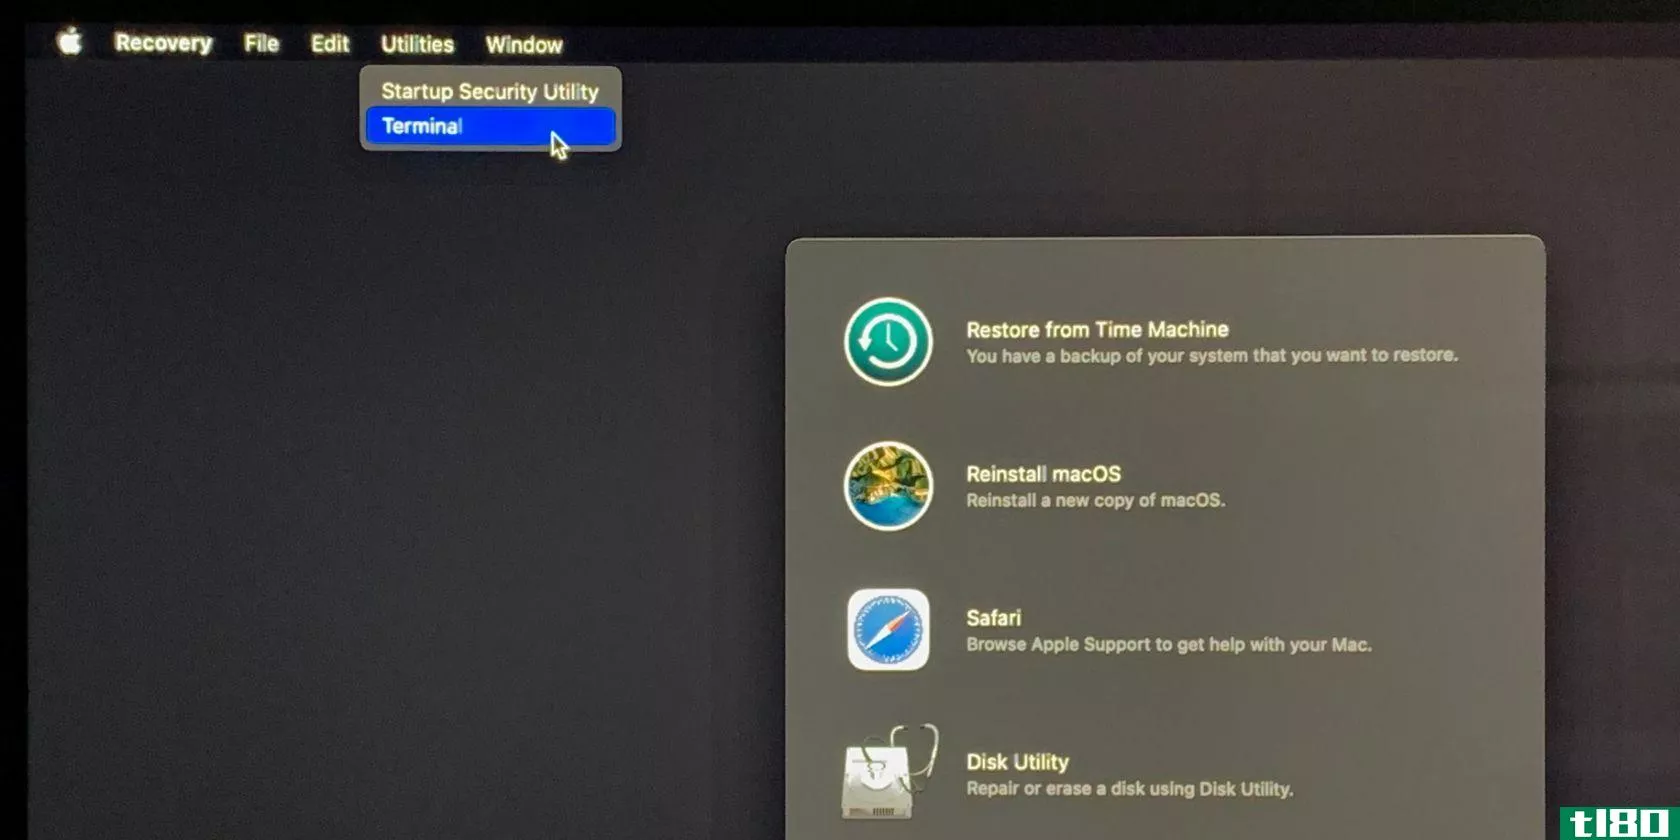 Terminal option in macOS Recovery